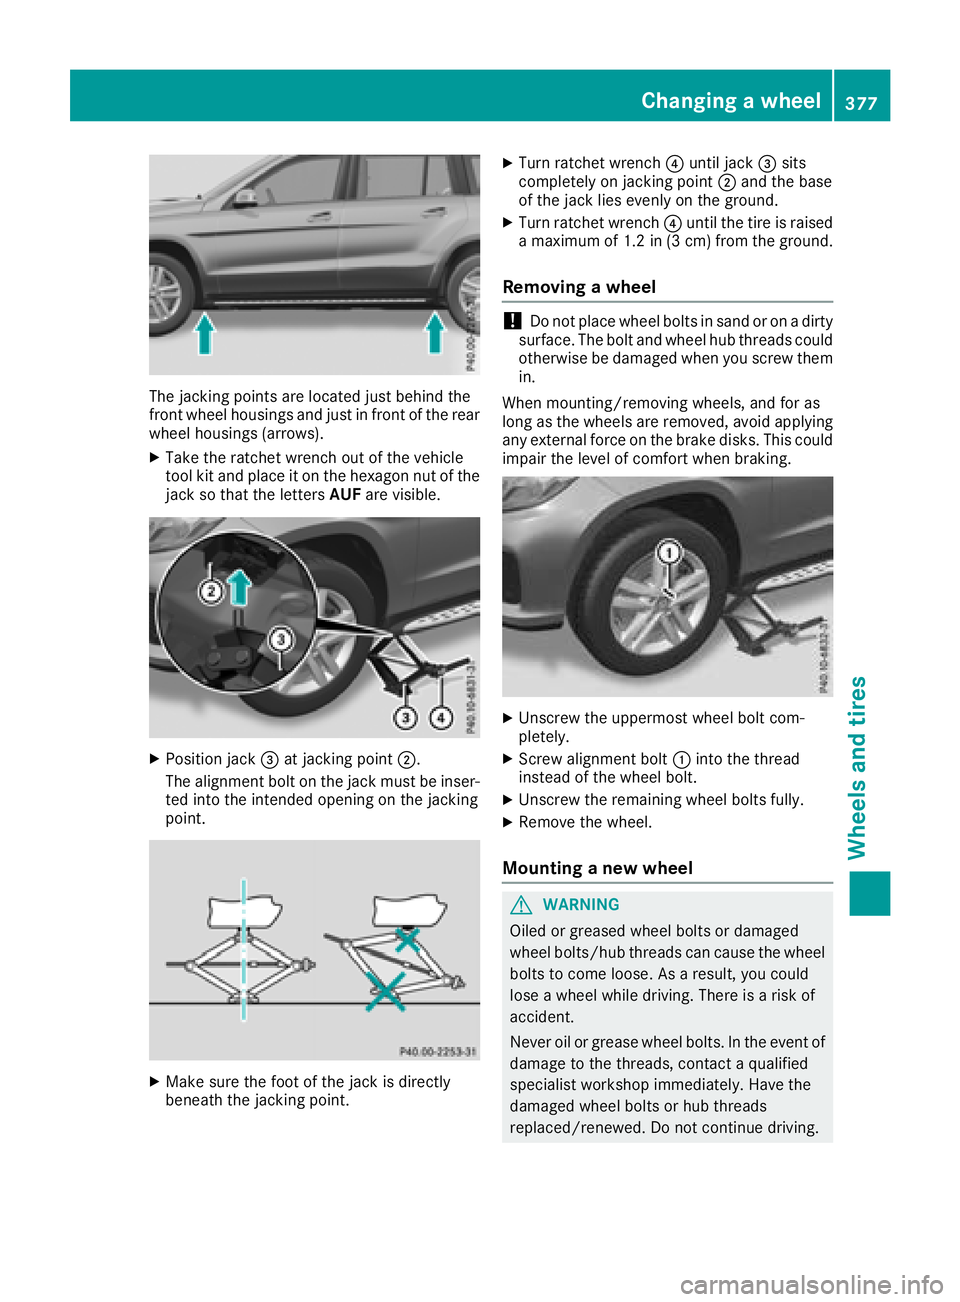 MERCEDES-BENZ GLS 2018  Owners Manual The jacking points are located just behind the
front wheel housings and just in front of the rear
wheel housings (arrows). X
Take the ratchet wrench out of the vehicle
tool kit and place it on the hex